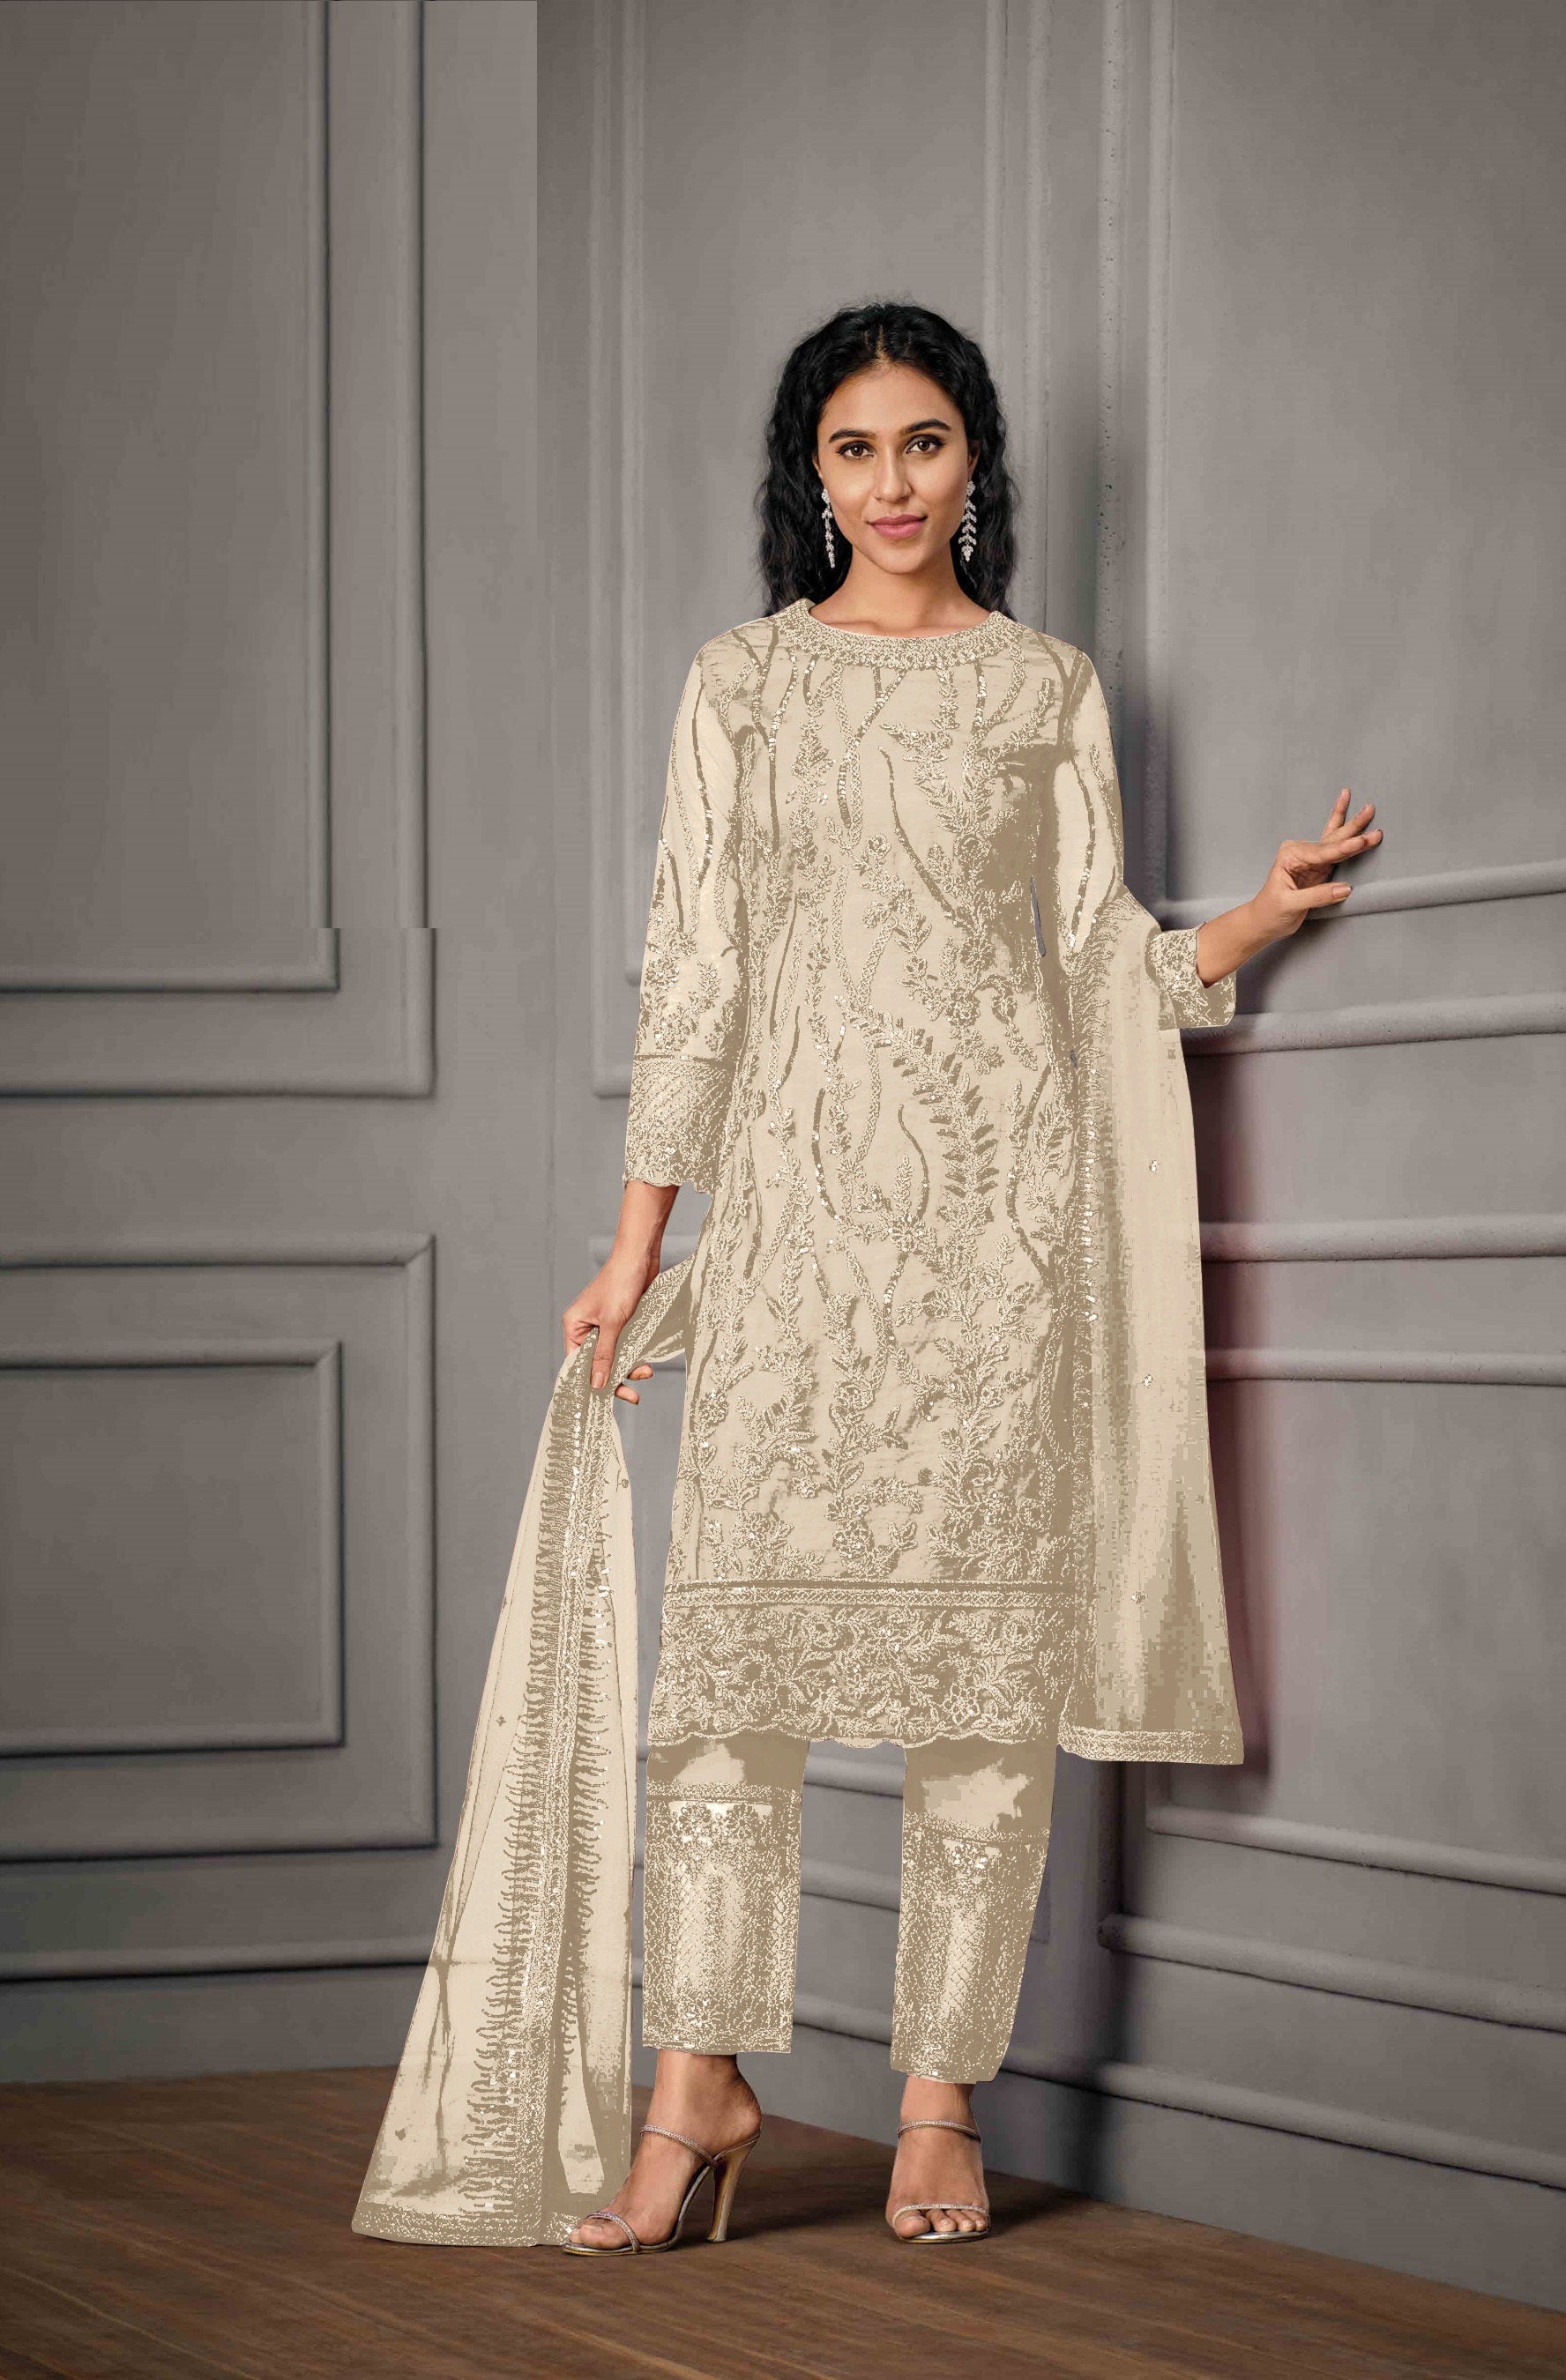 Art Silk Palazzo Salwar Kameez Suit With AllOver Zari Floral Embroidery  And Chiffon Dupatta  Exotic India Art